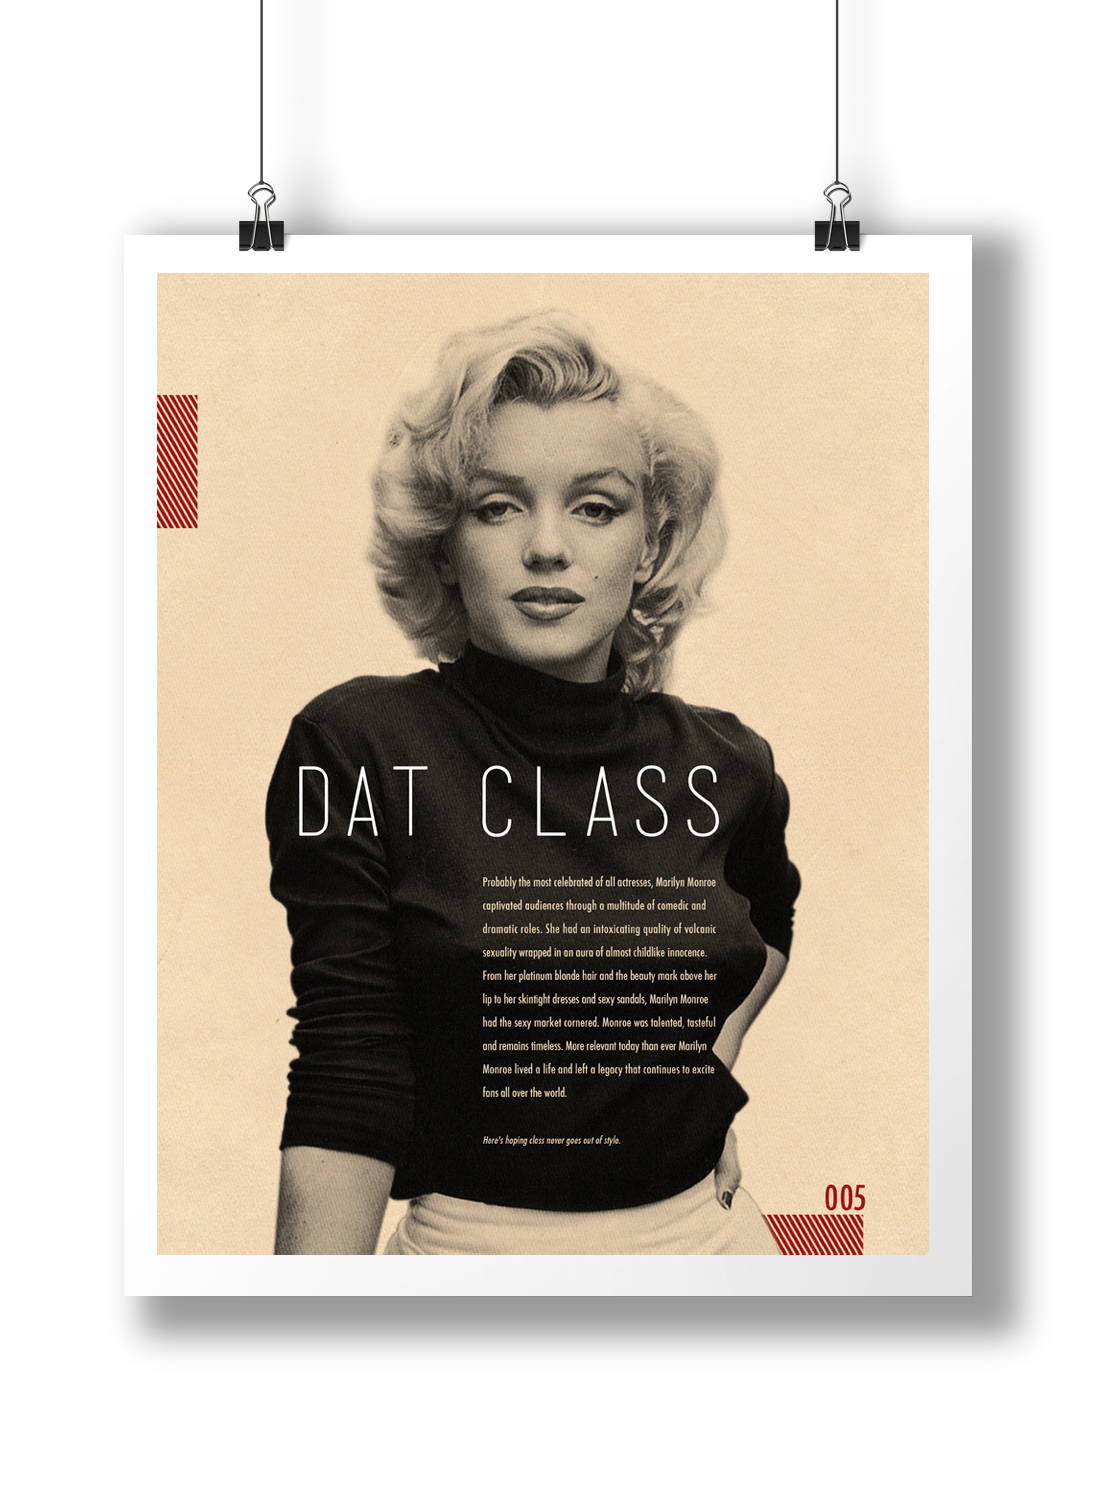 poster class Classic art Audrey Hepburn johnny cash sean connery james bond Movies Marilyn Monroe NEIL ARMSTRONG black and white print layout Layout